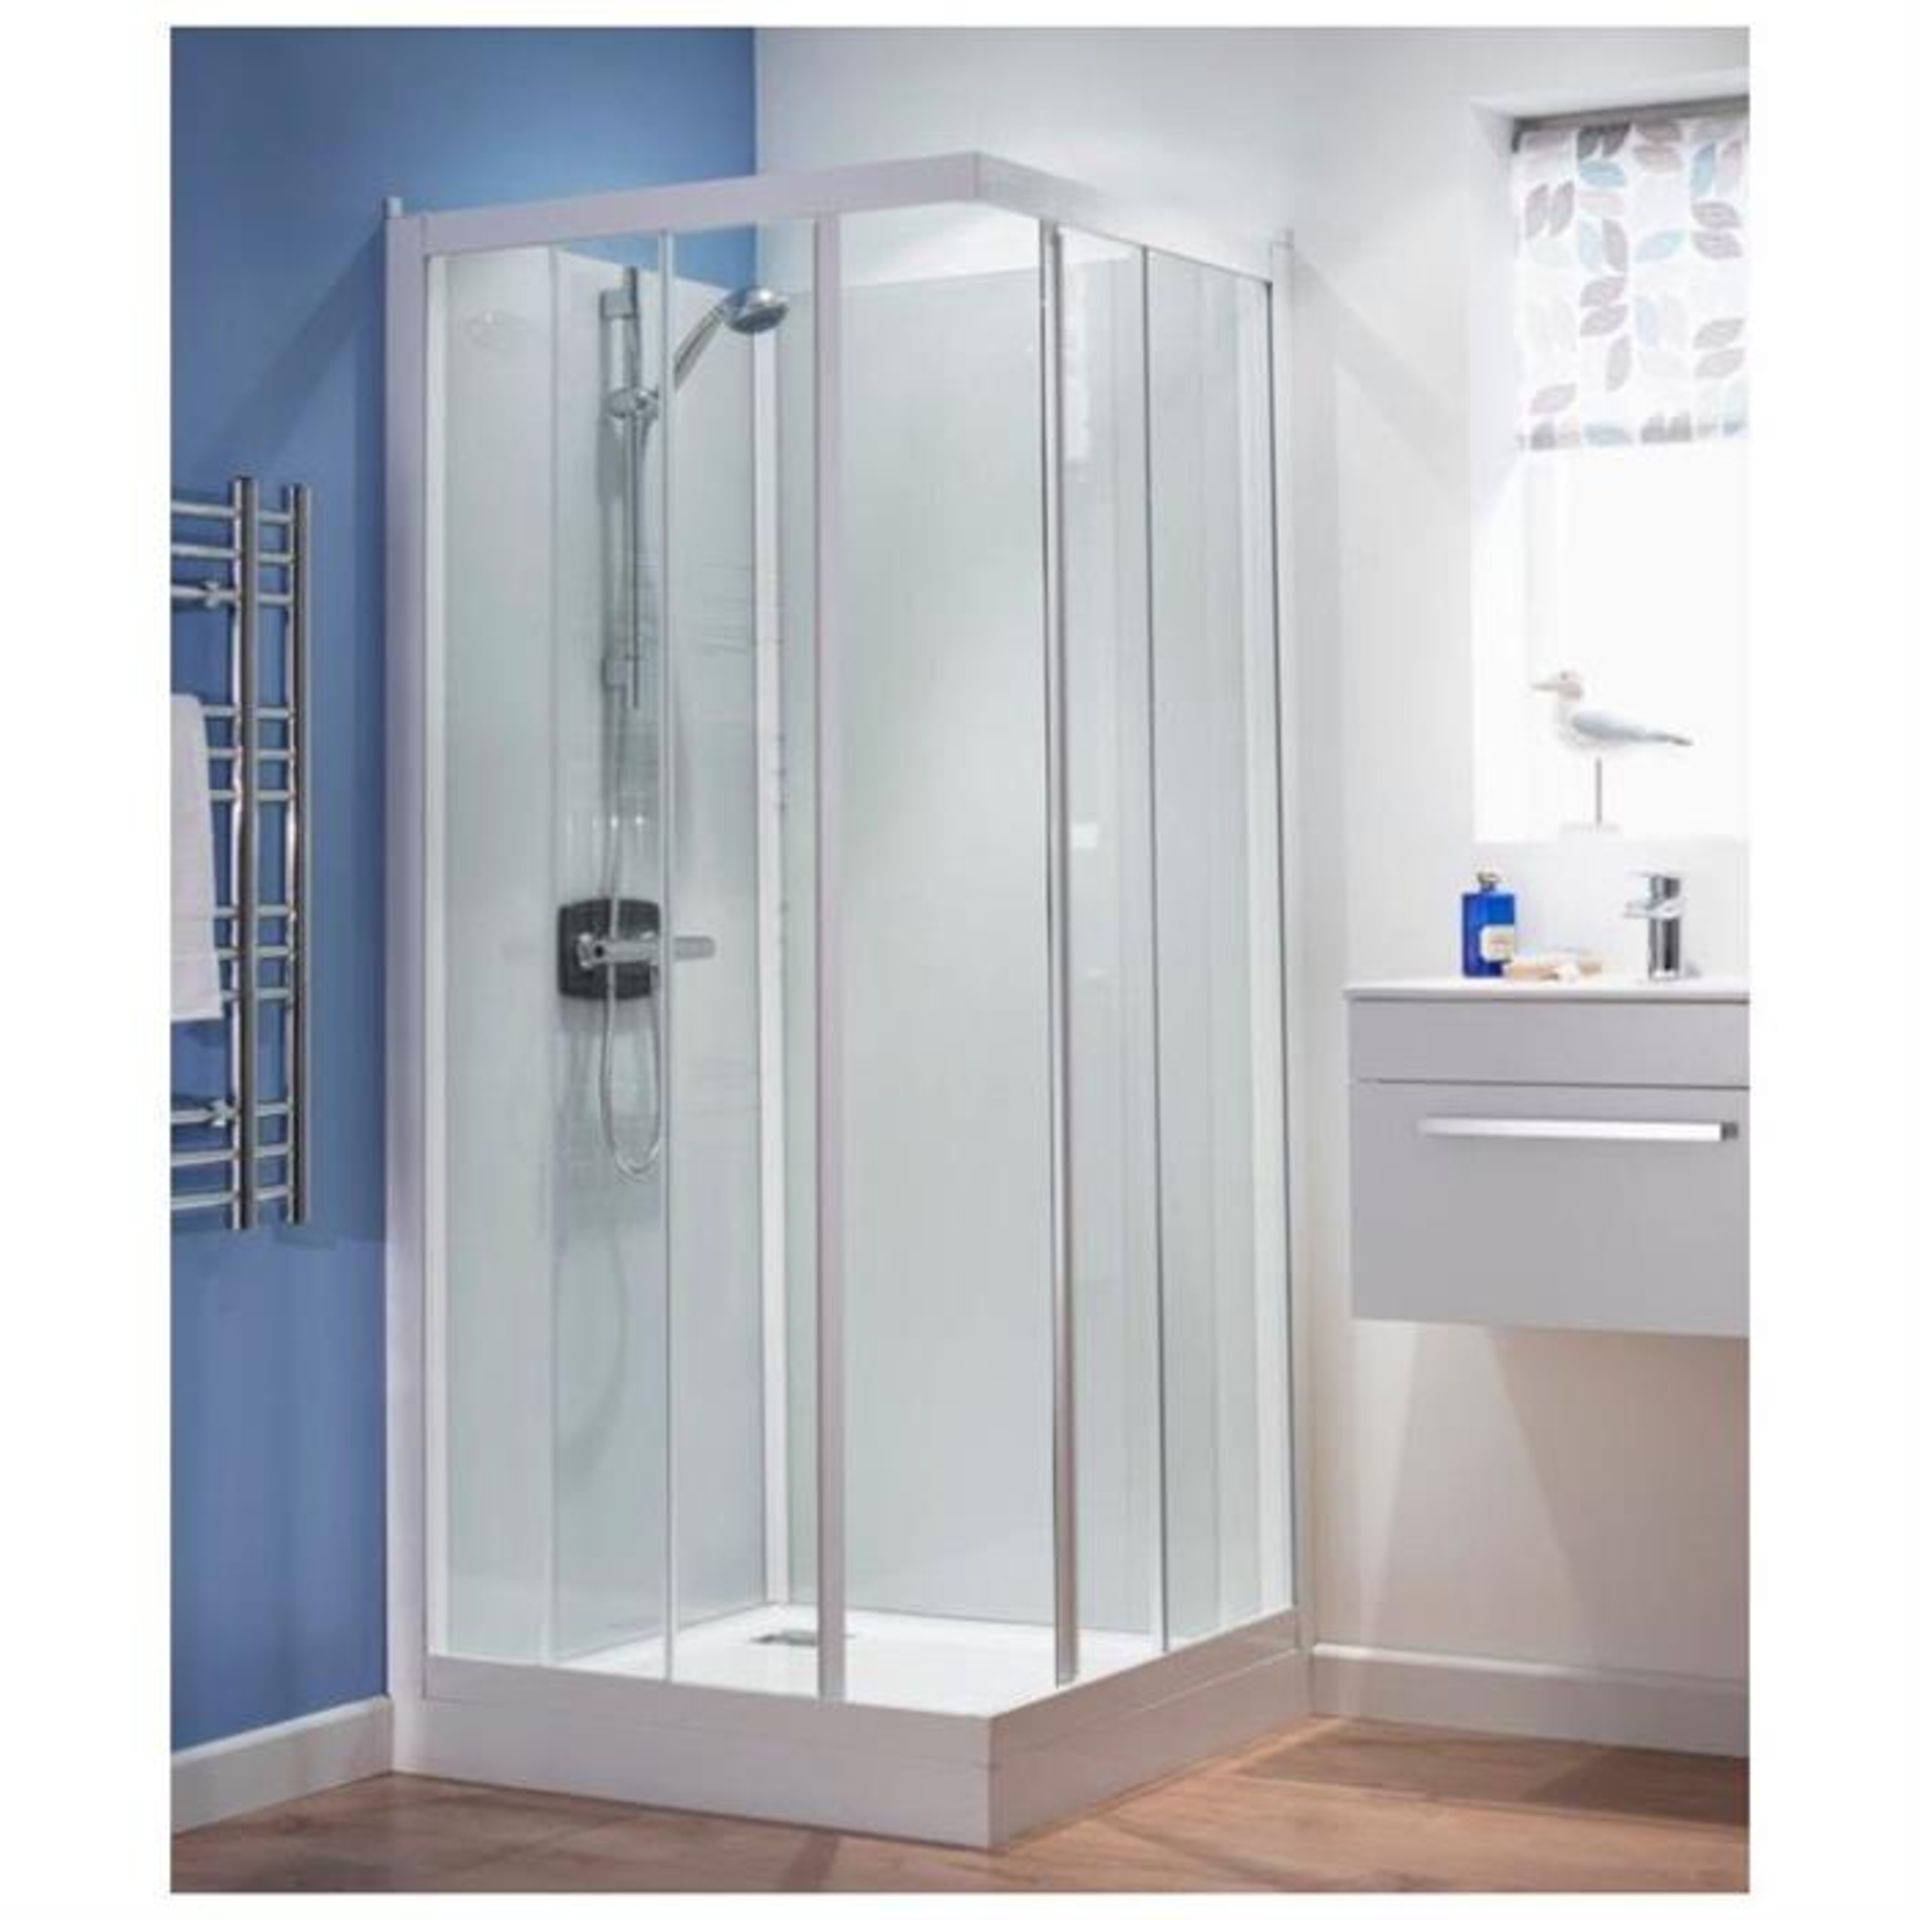 Kinedo Prime Complete 900x900mm shower enclosure, in 5 boxes